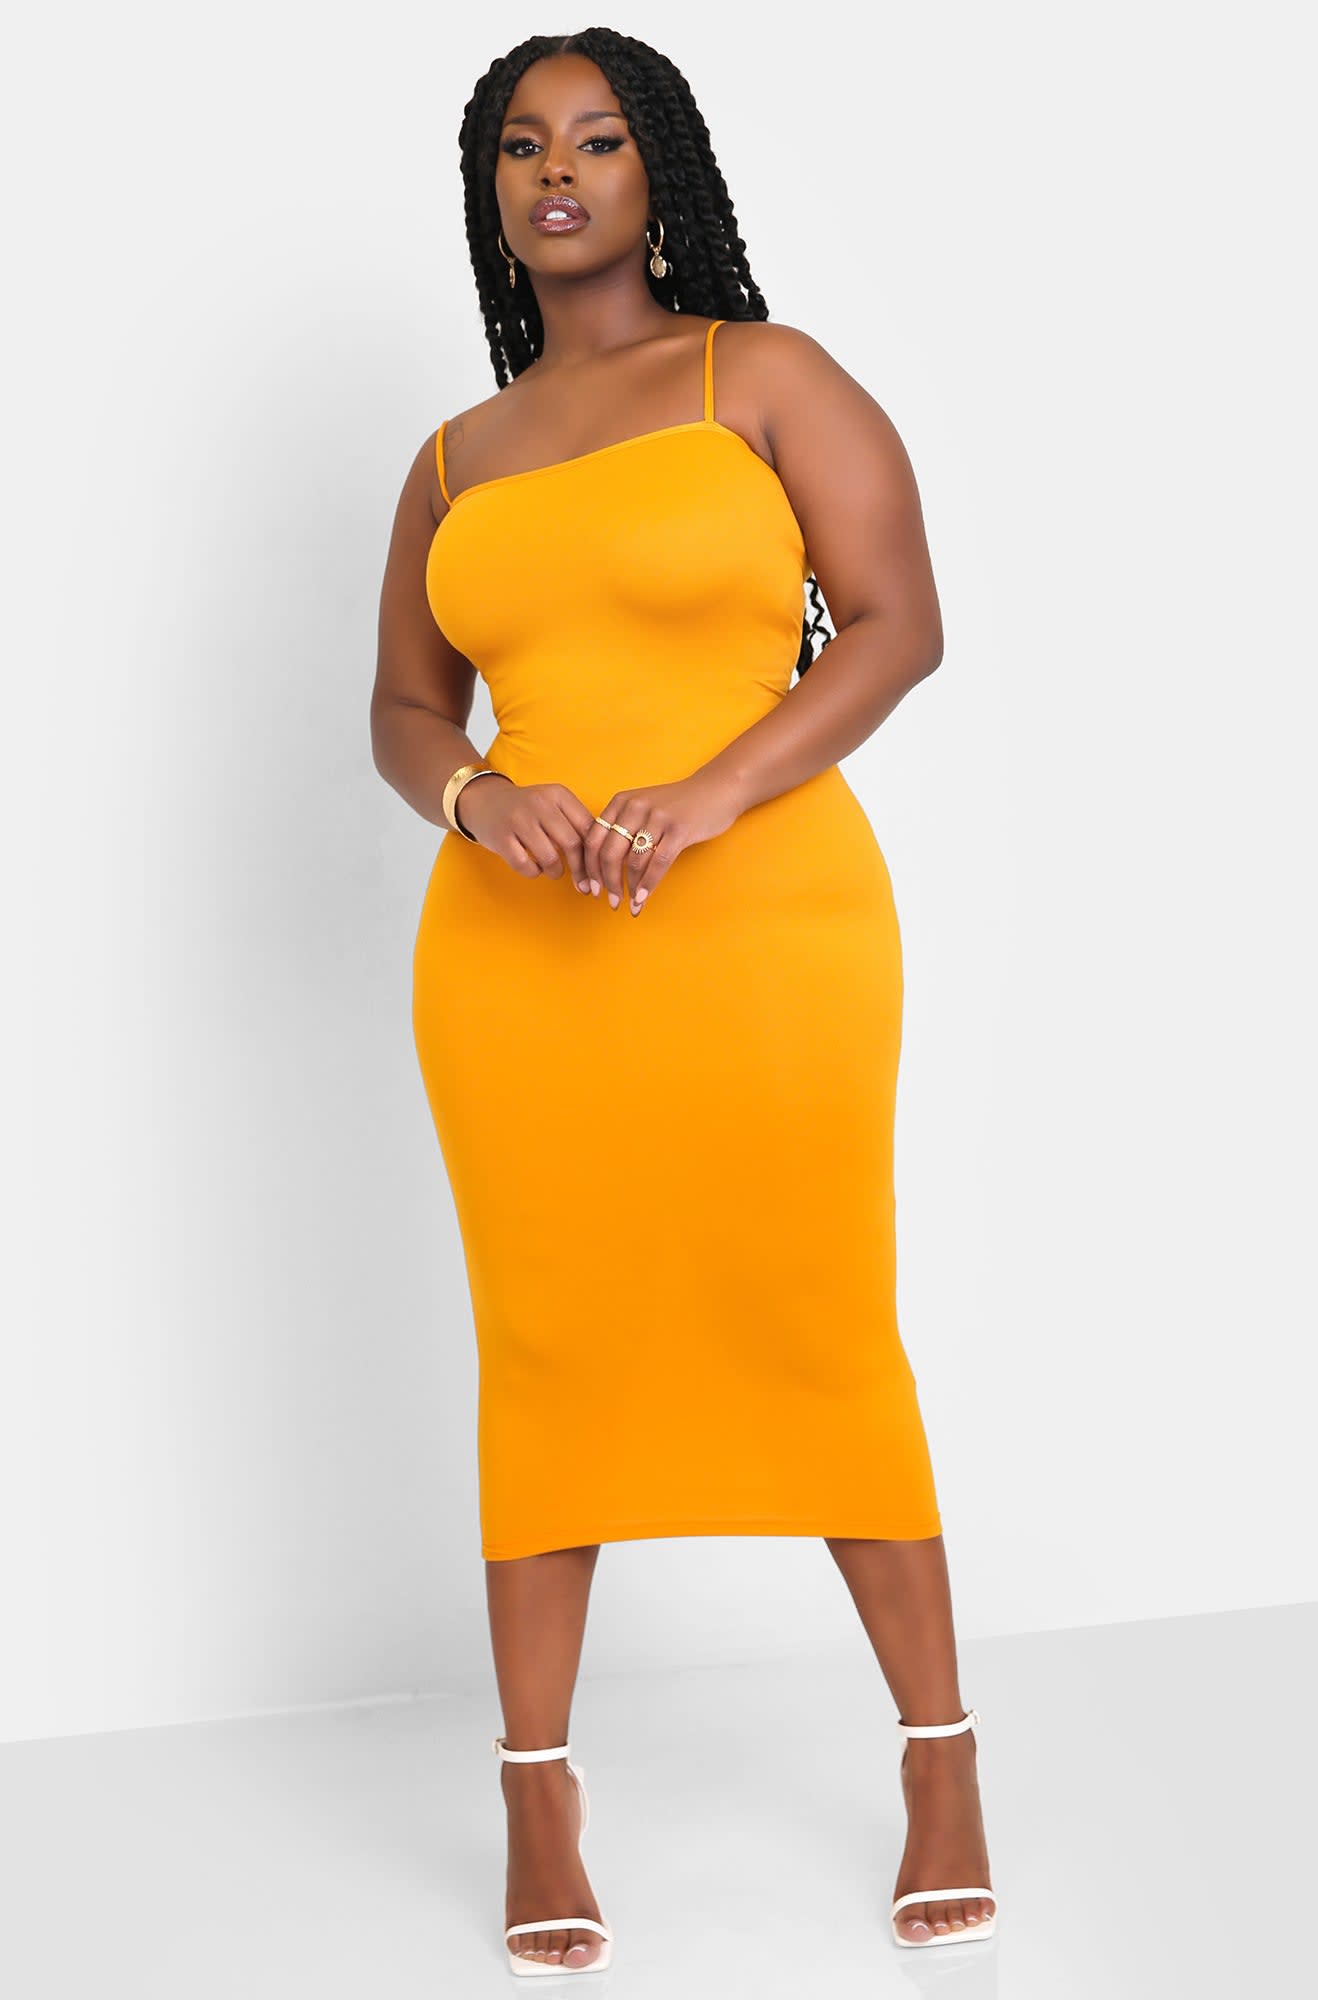 10 Places To Buy Plus Size Resort wear - My Curves And Curls